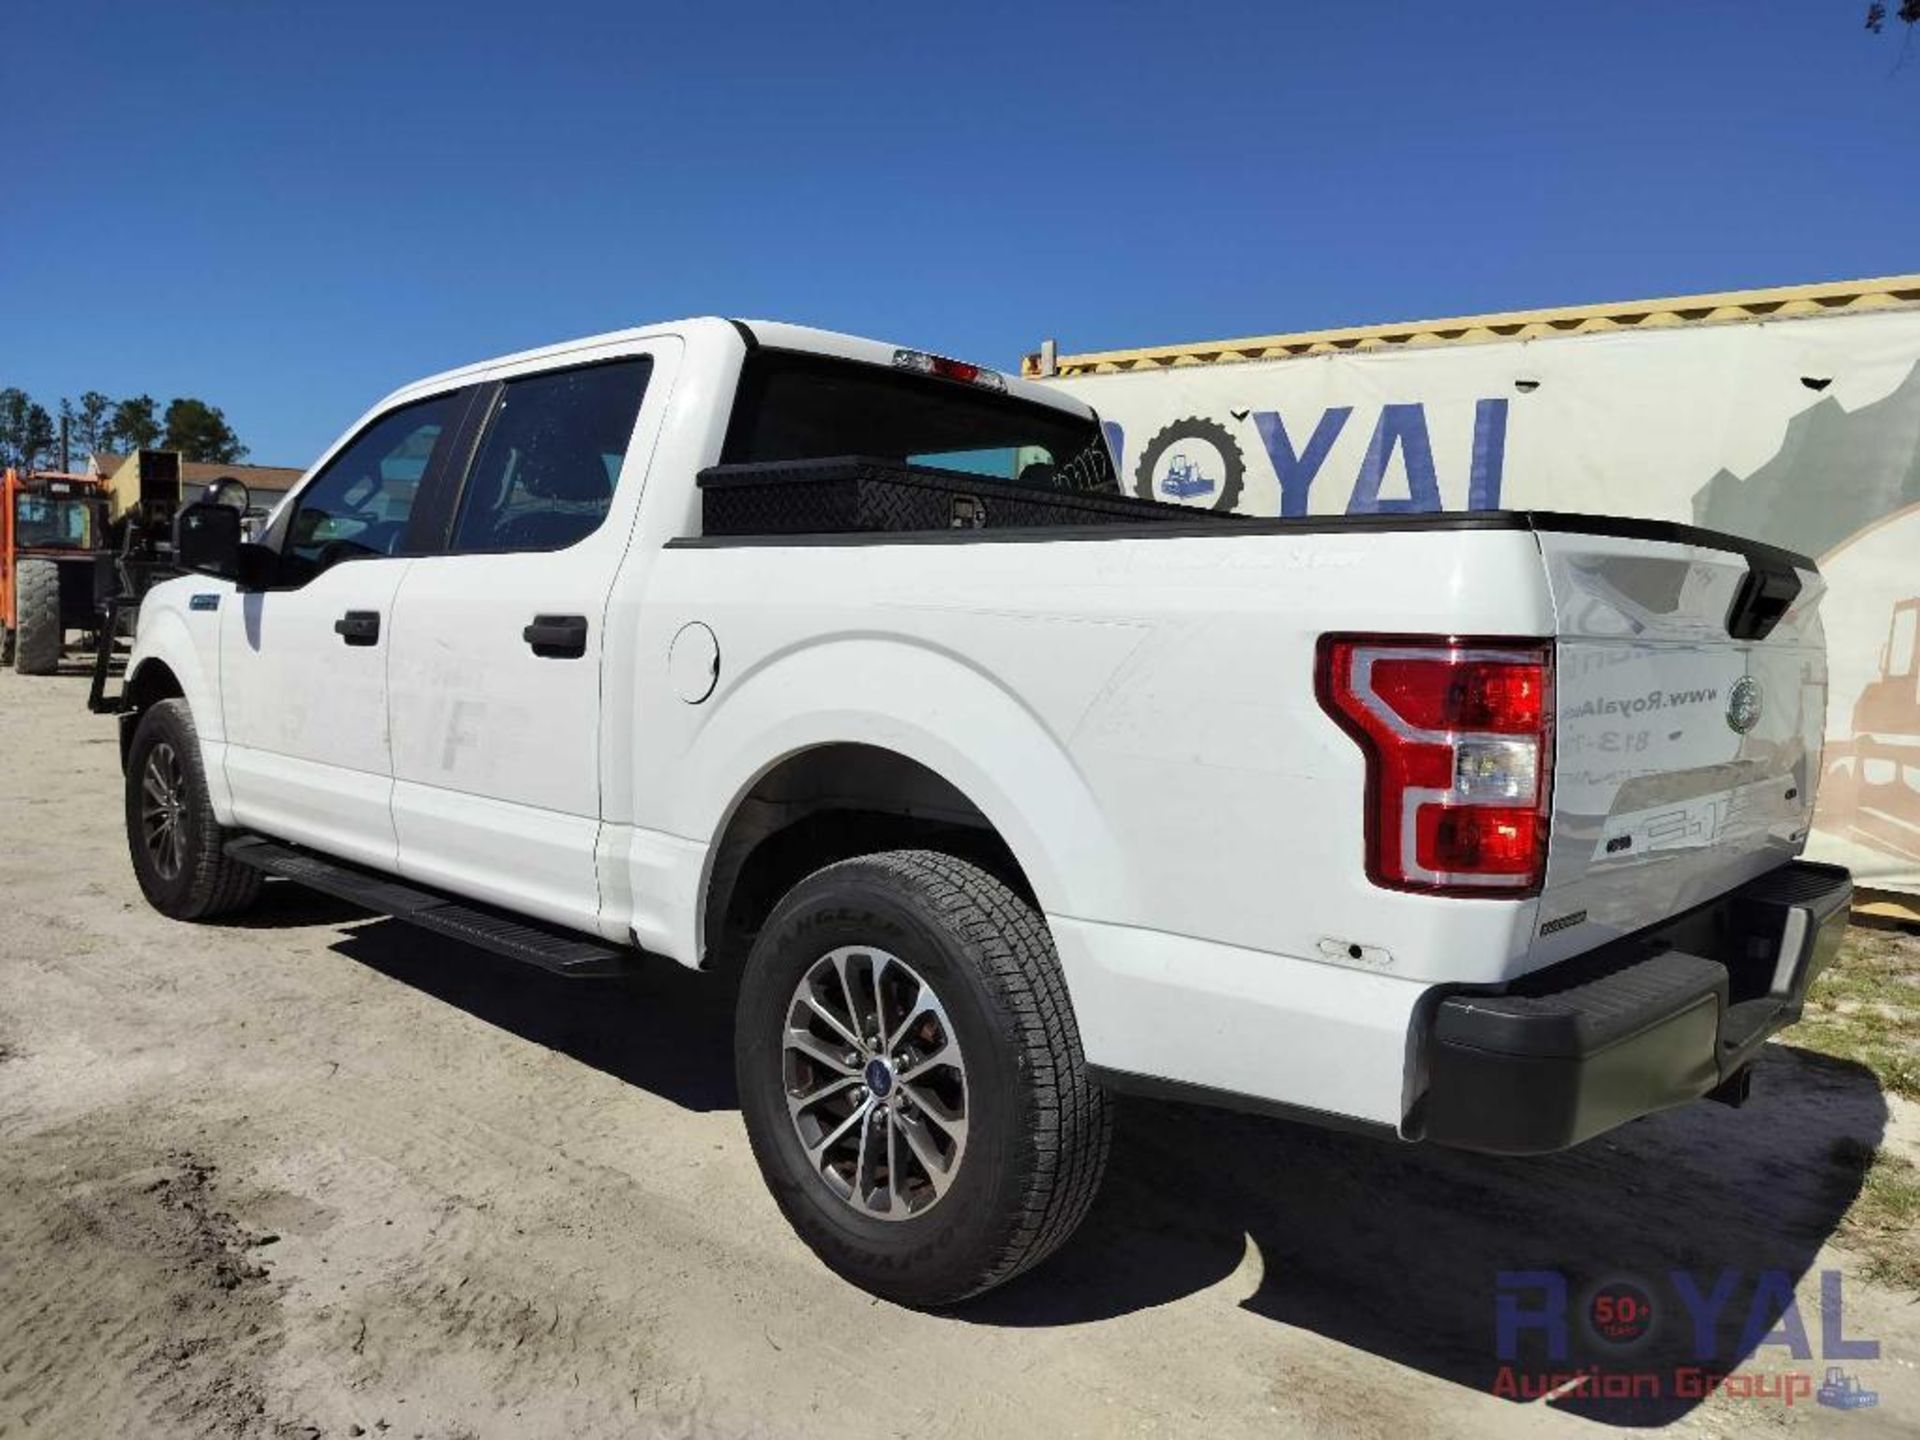 2019 Ford F150 4x4 Pickup Truck - Image 4 of 33